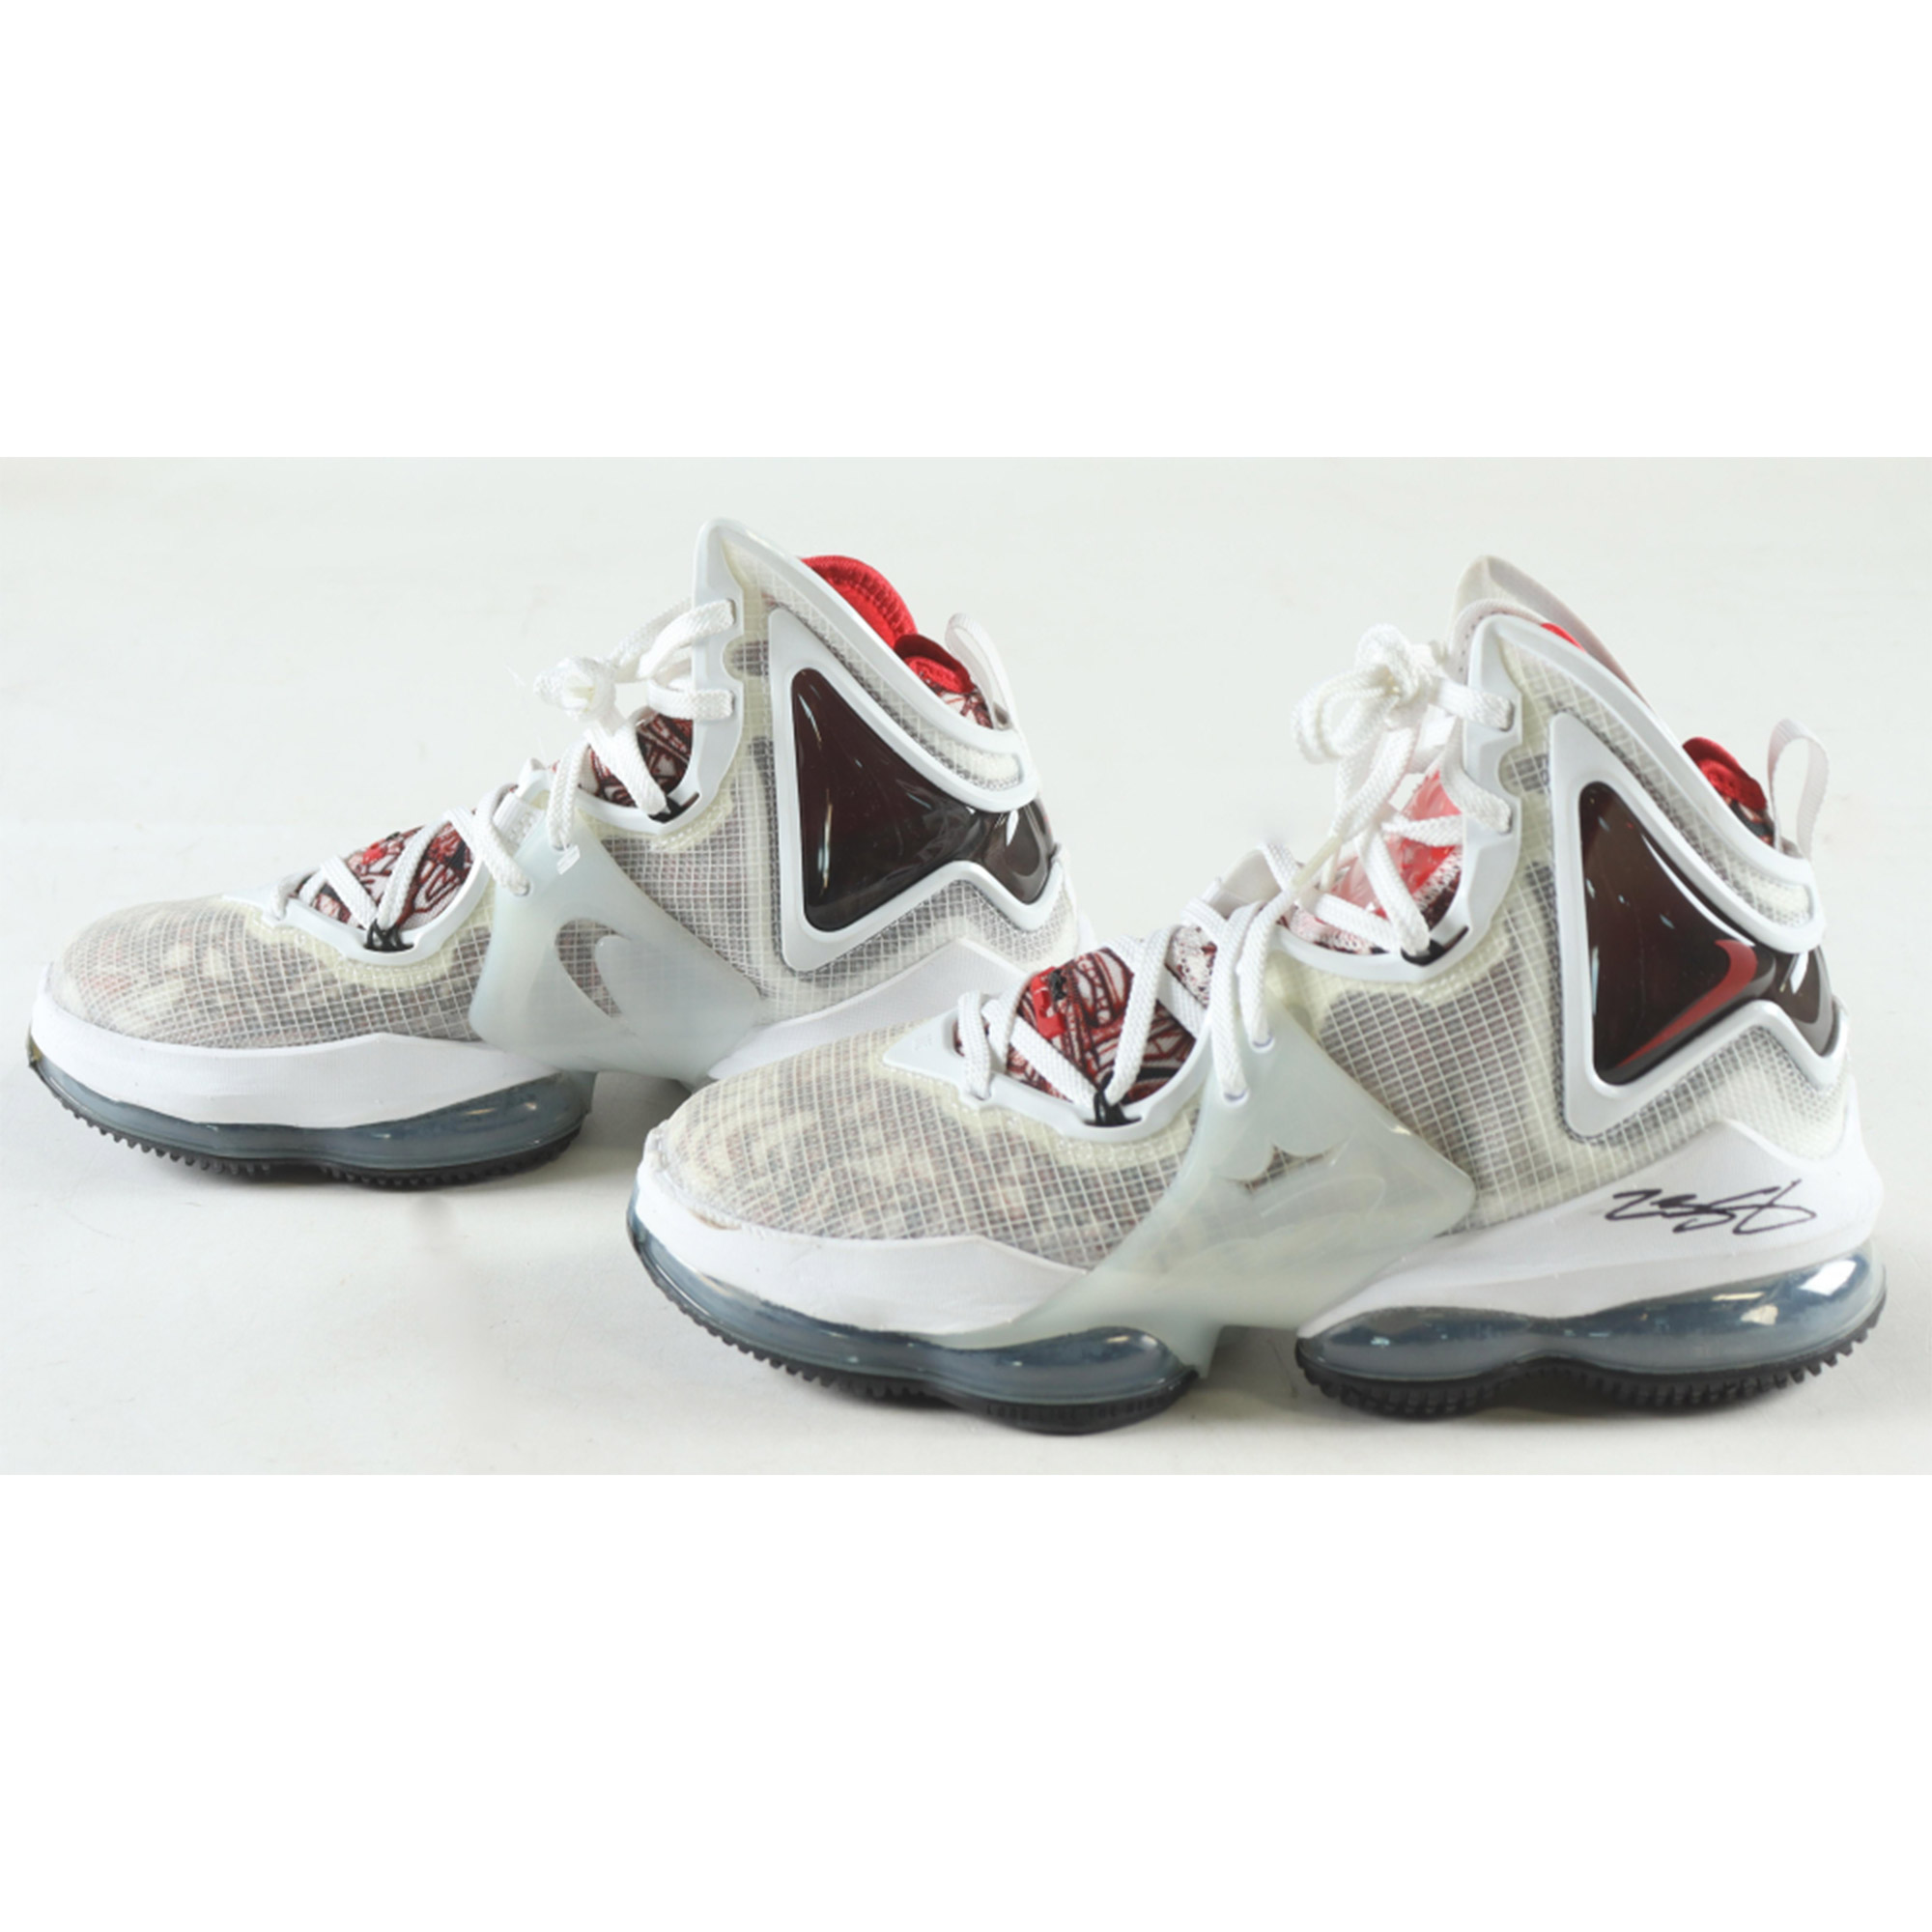 LEBRON JAMES Hand Signed Pair of Nike LeBron 19 XIX Sketch White/Red B...